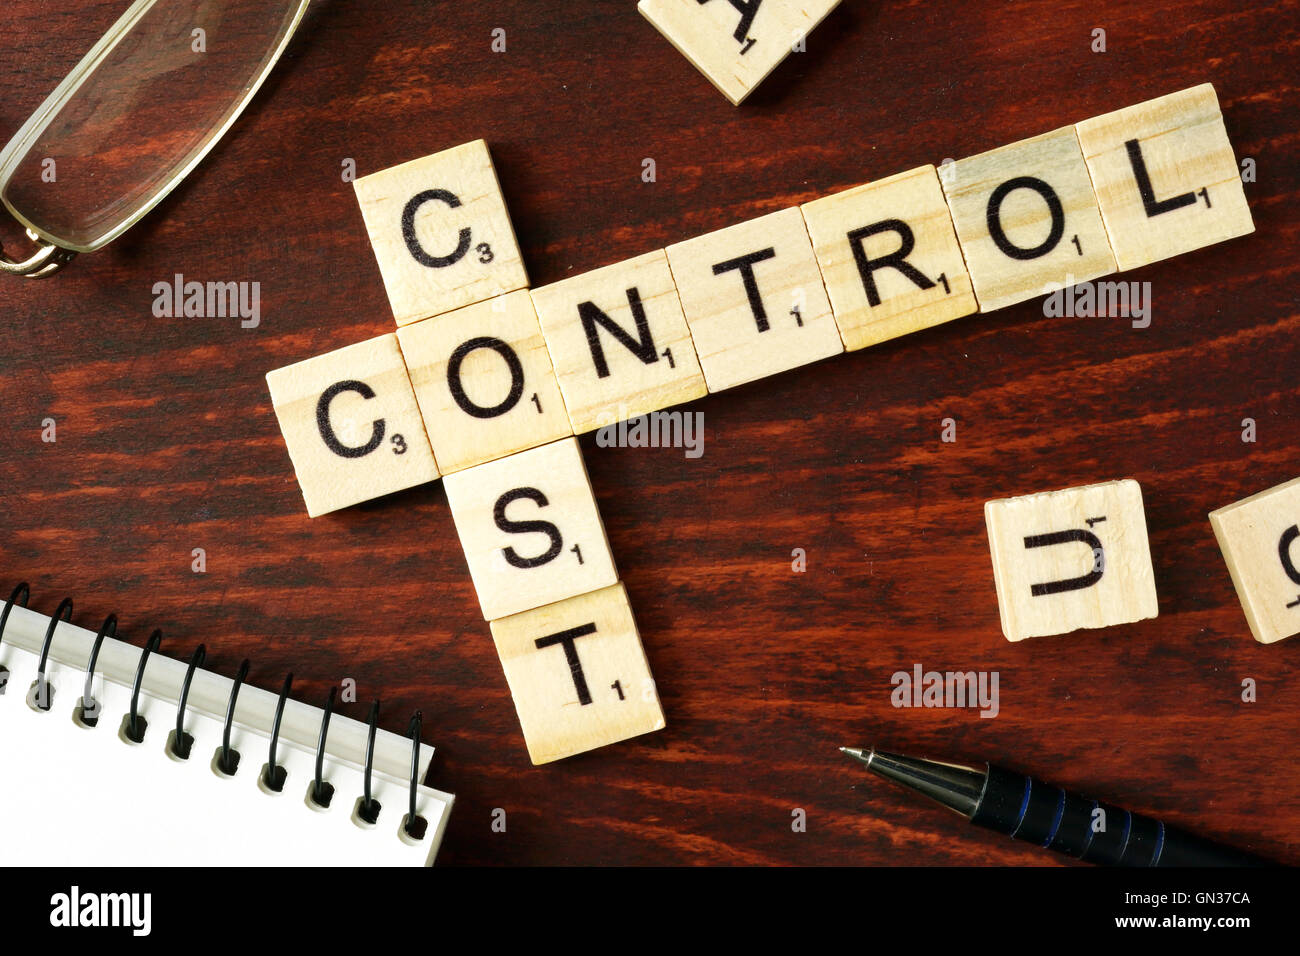 Words Control Cost from wooden blocks with letters. Stock Photo